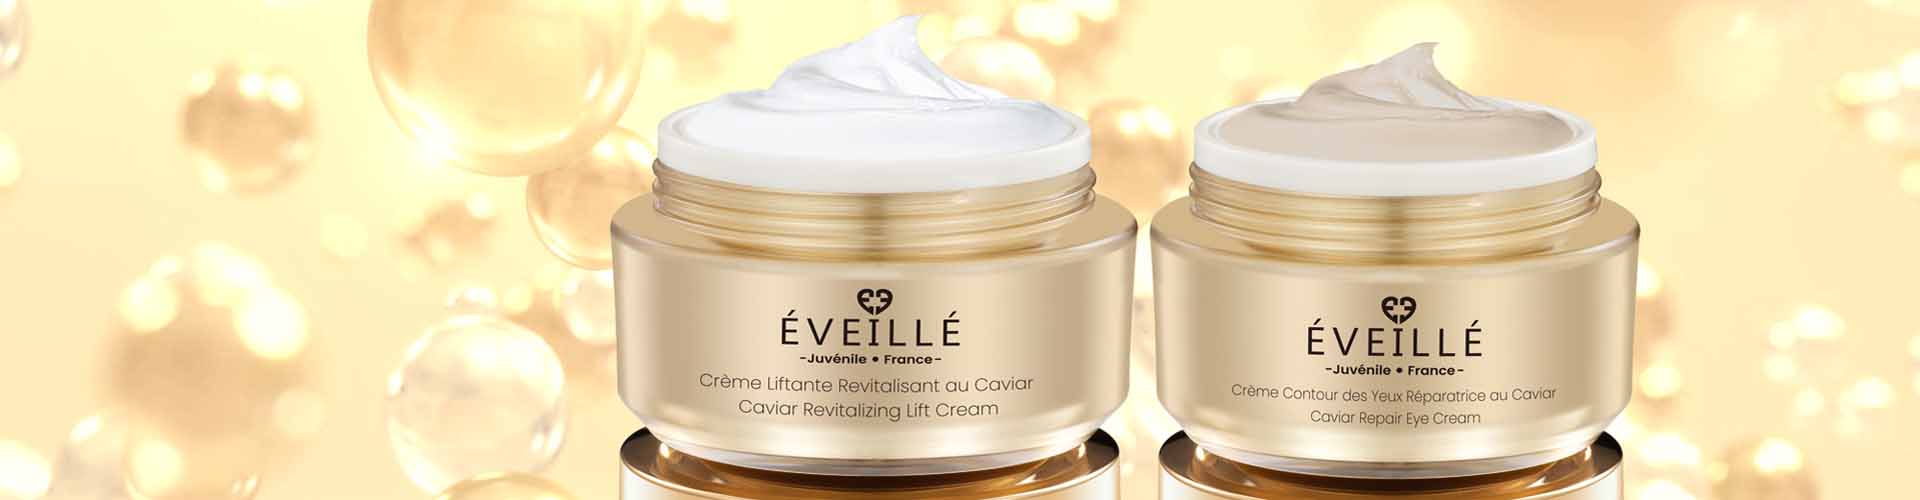 Eveillees Products